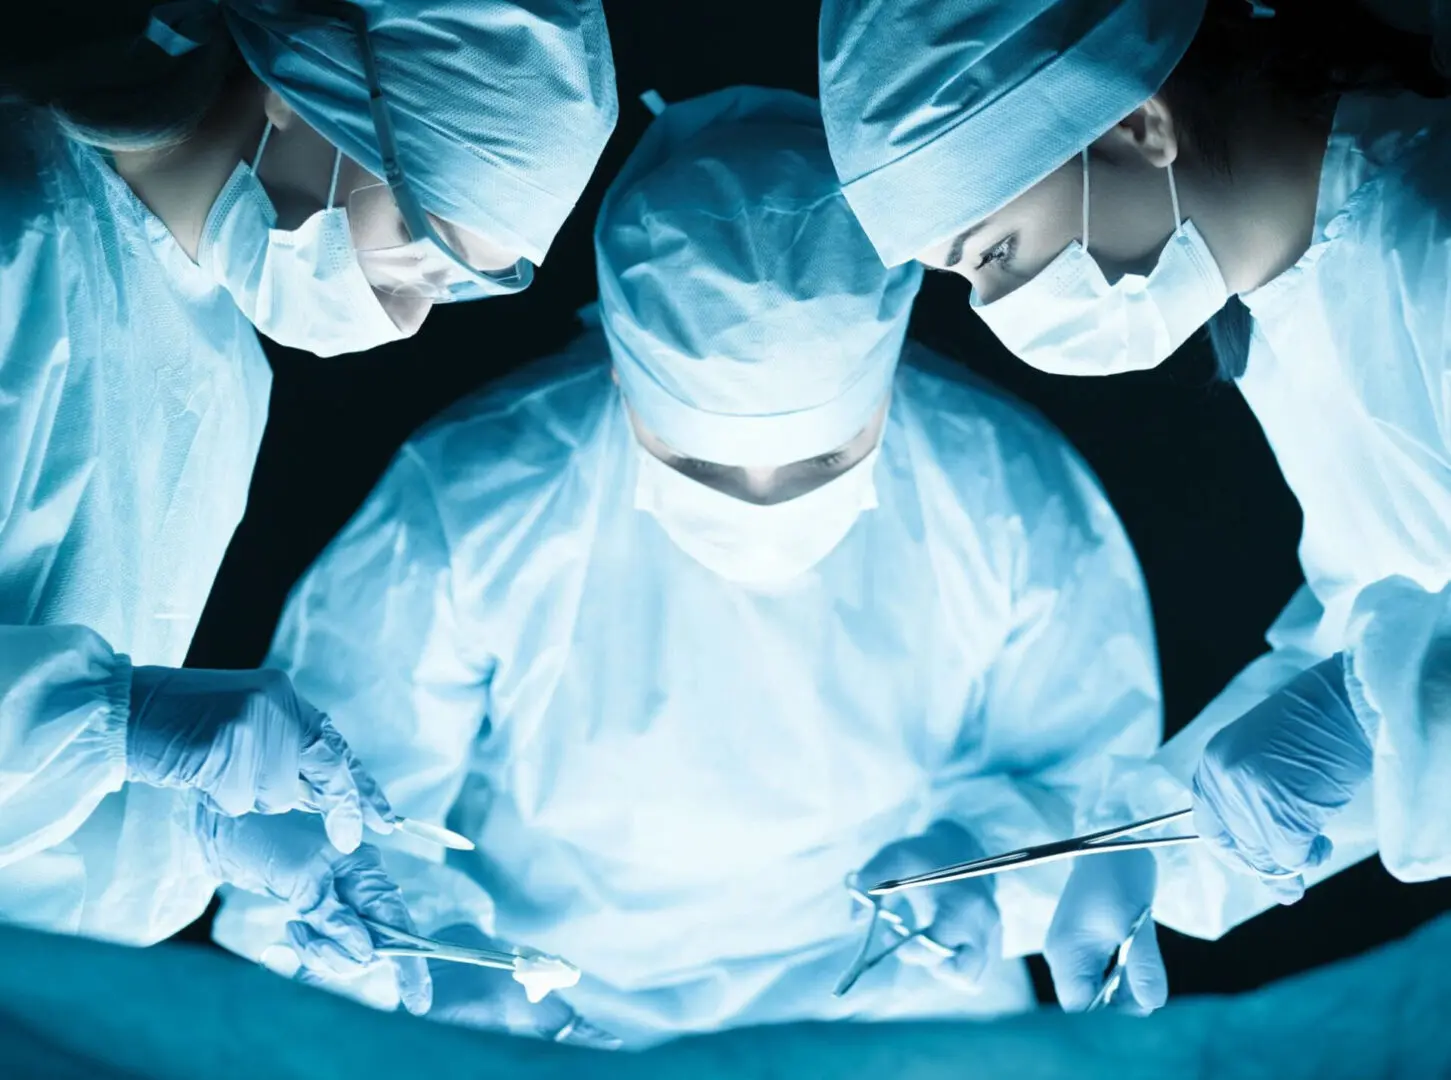 A close up picture of three surgeons doing an operation